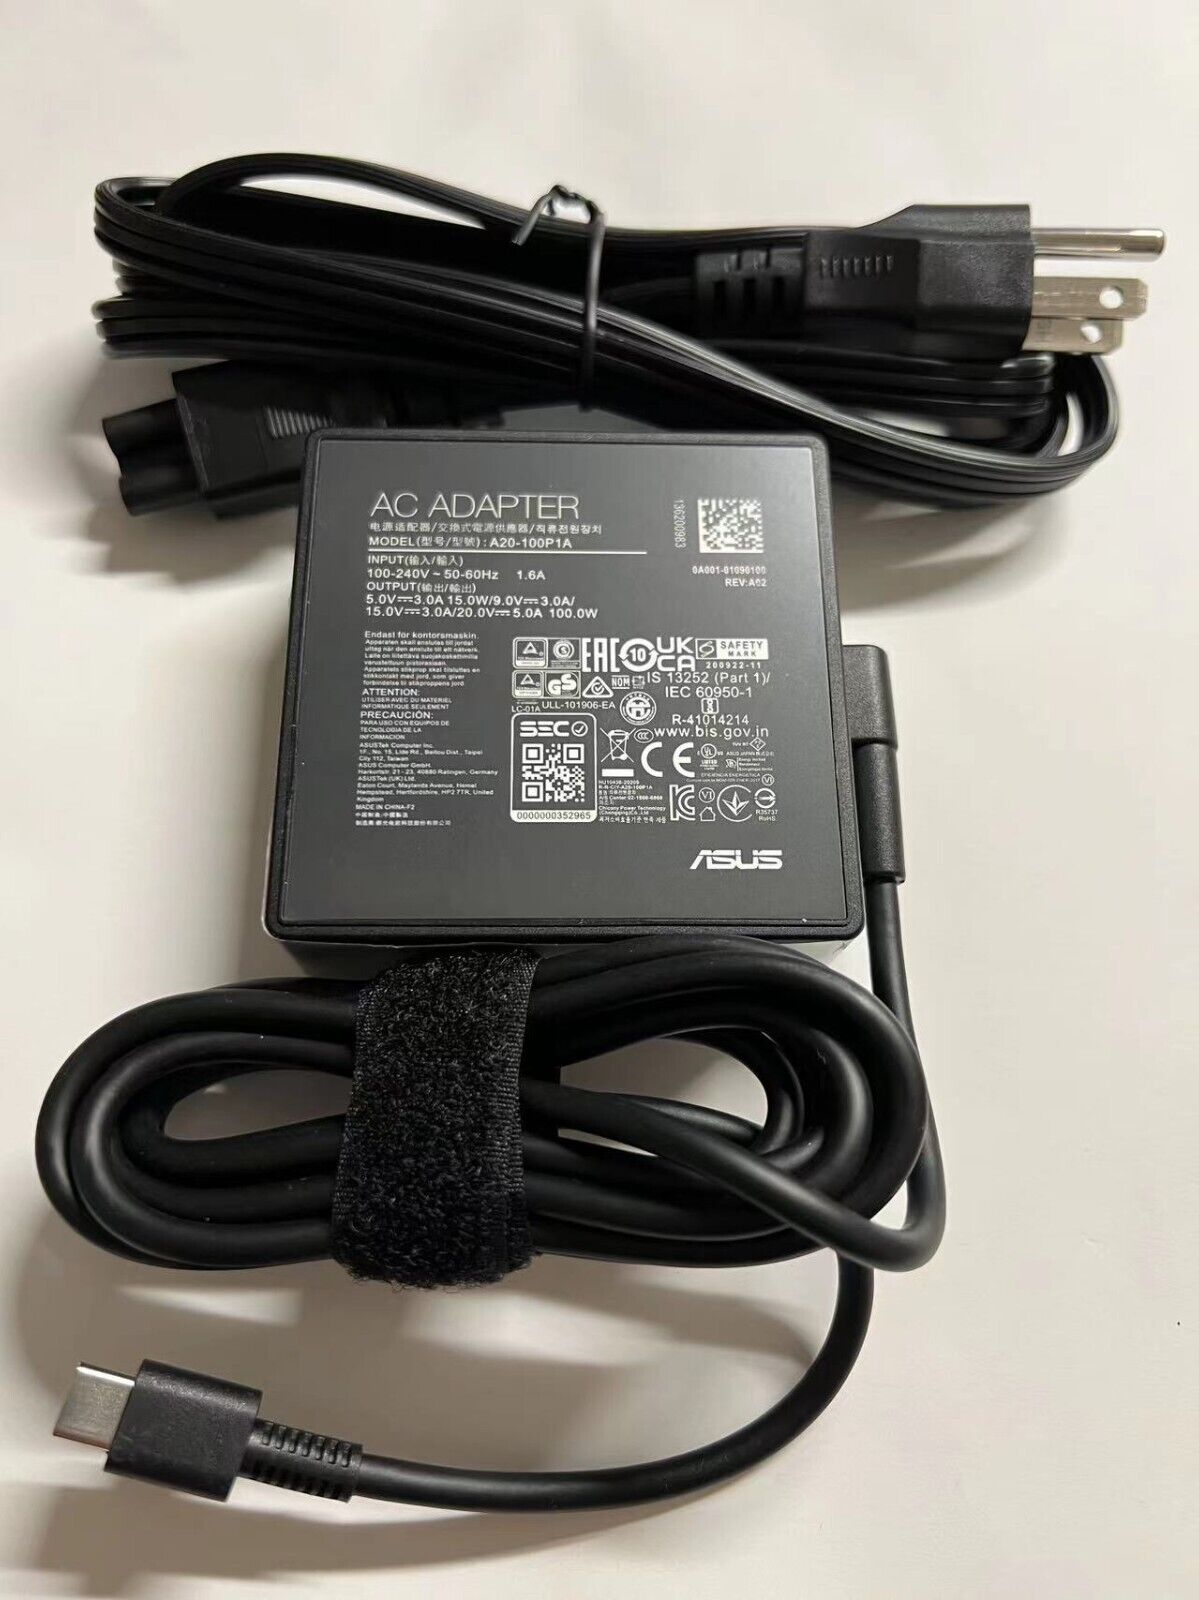 ASUS 100W USB-C Adapter Charger A20-100P1A for ASUS ROG Flow X13 Z13 gv301 gz301